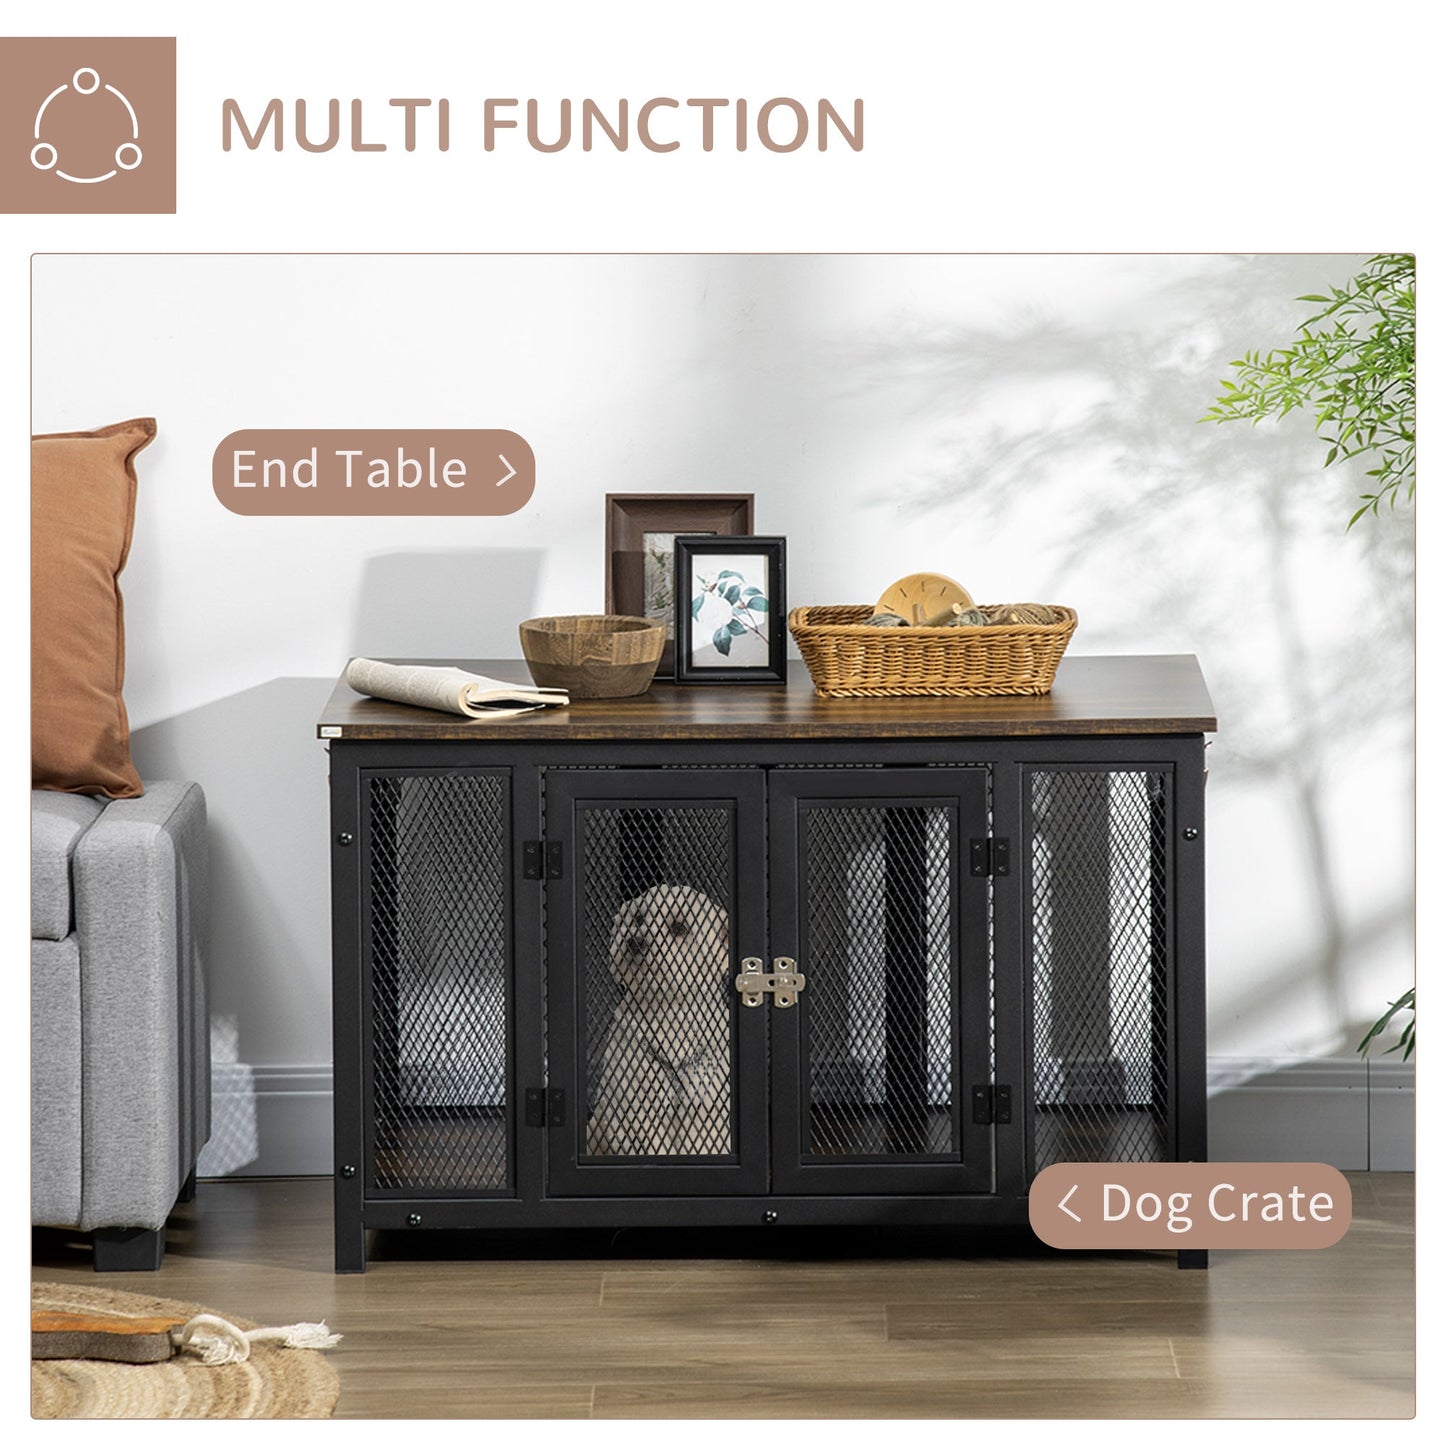 Pet Supplies-Heavy-Duty Large Dog Crate Furniture with Spacious Interior, Big Dog Crate End Table, Puppy Crate for Medium Dogs, Pet Kennel, Brown/Black - Outdoor Style Company